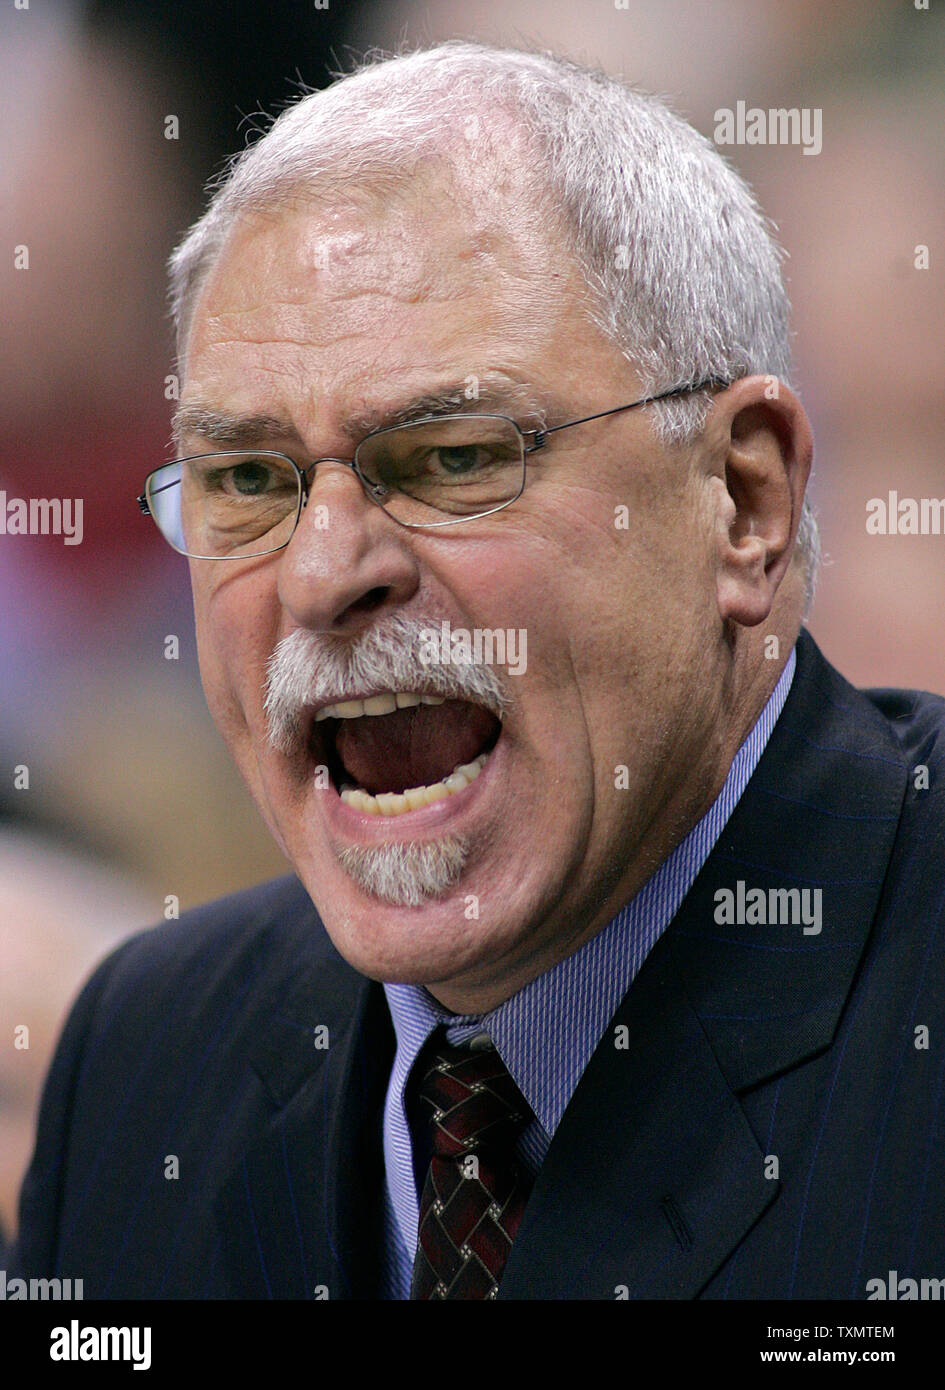 Los Angeles Lakers head coach Phil Jackson shouts at his team during second quarter against the Denver Nuggets in the Lakers season opener at the Pepsi Center in Denver November 2, 2005.   Jackson is making his return to the Lakers and Kobe Bryant after a year's absence.    (UPI Photo/Gary C. Caskey) Stock Photo